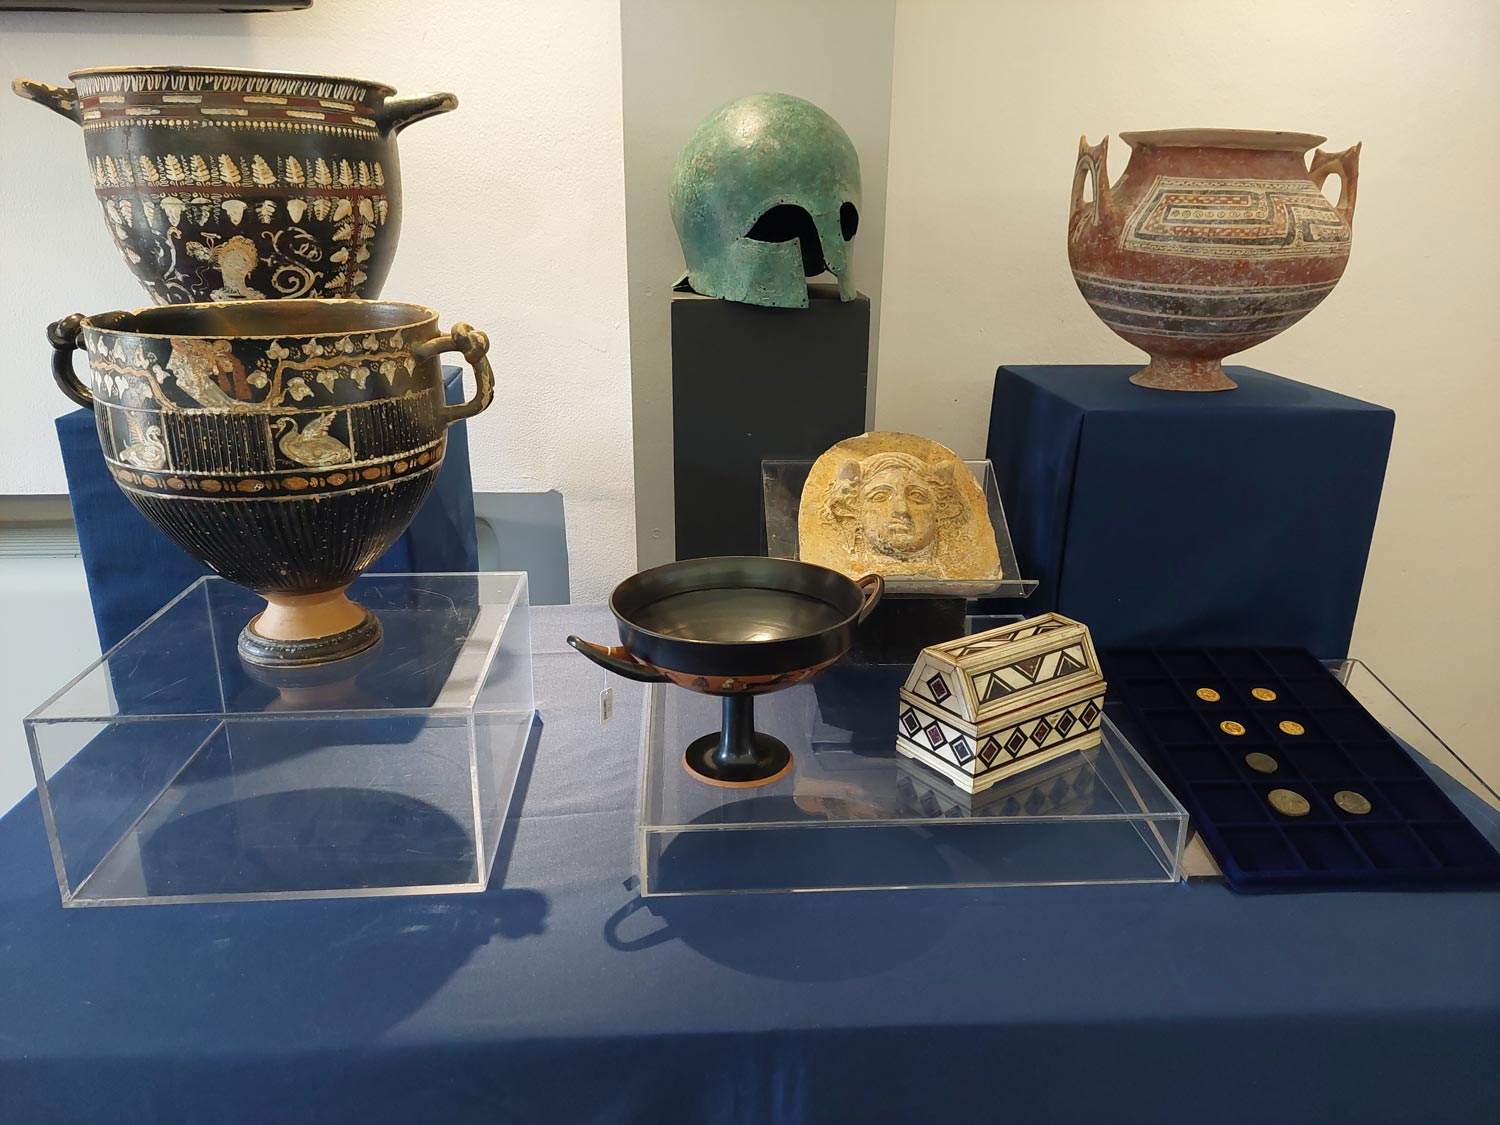 Germany returns 14 stolen cultural goods to Italy, some from museums